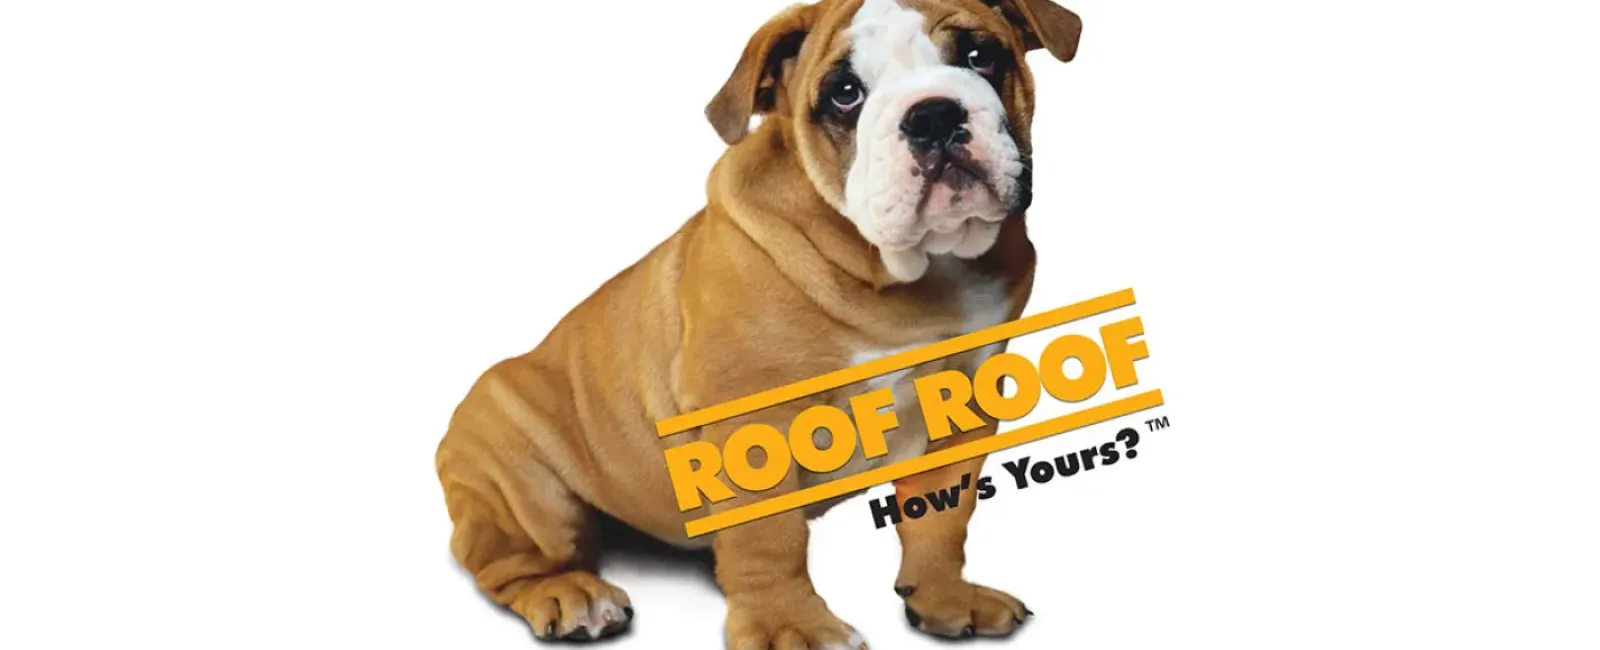 Findlay Roofing's Website Performs!